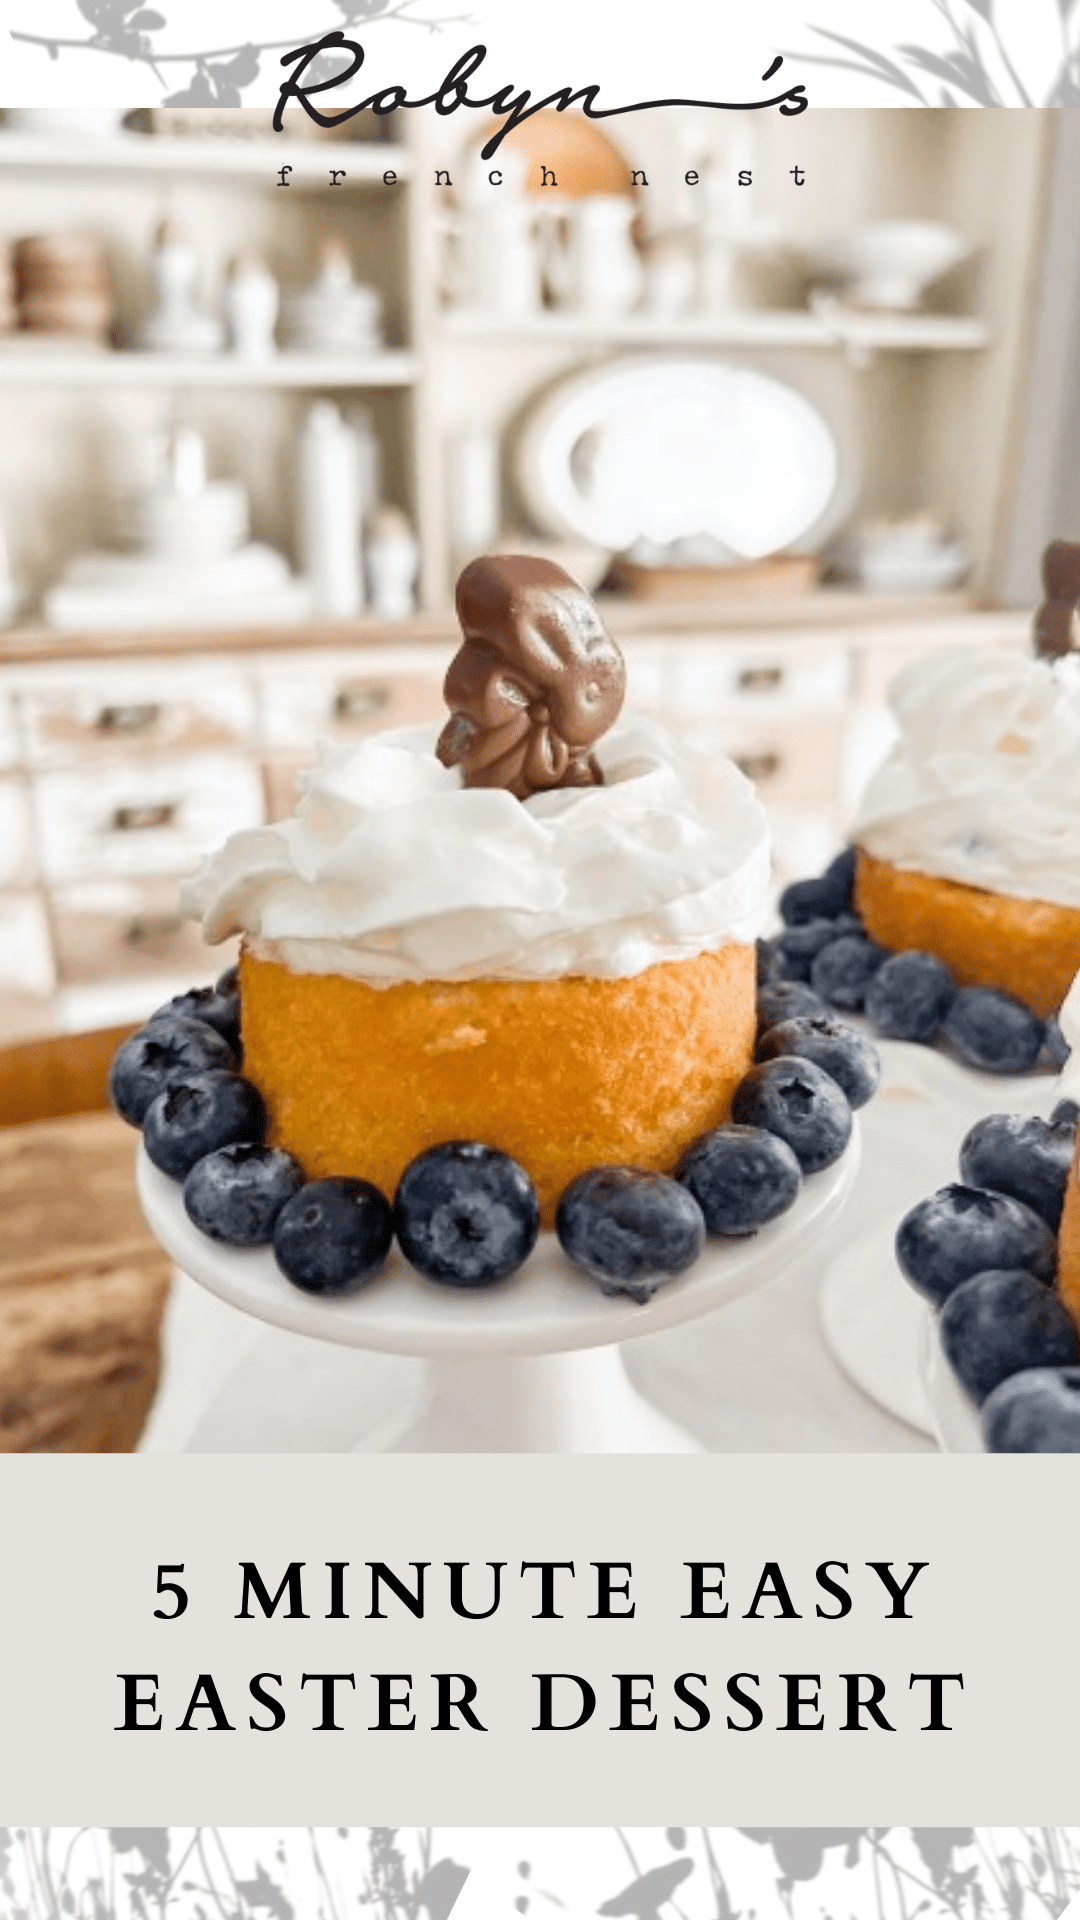 5 Minute Easy and Tasty Easter Dessert You’ll Love